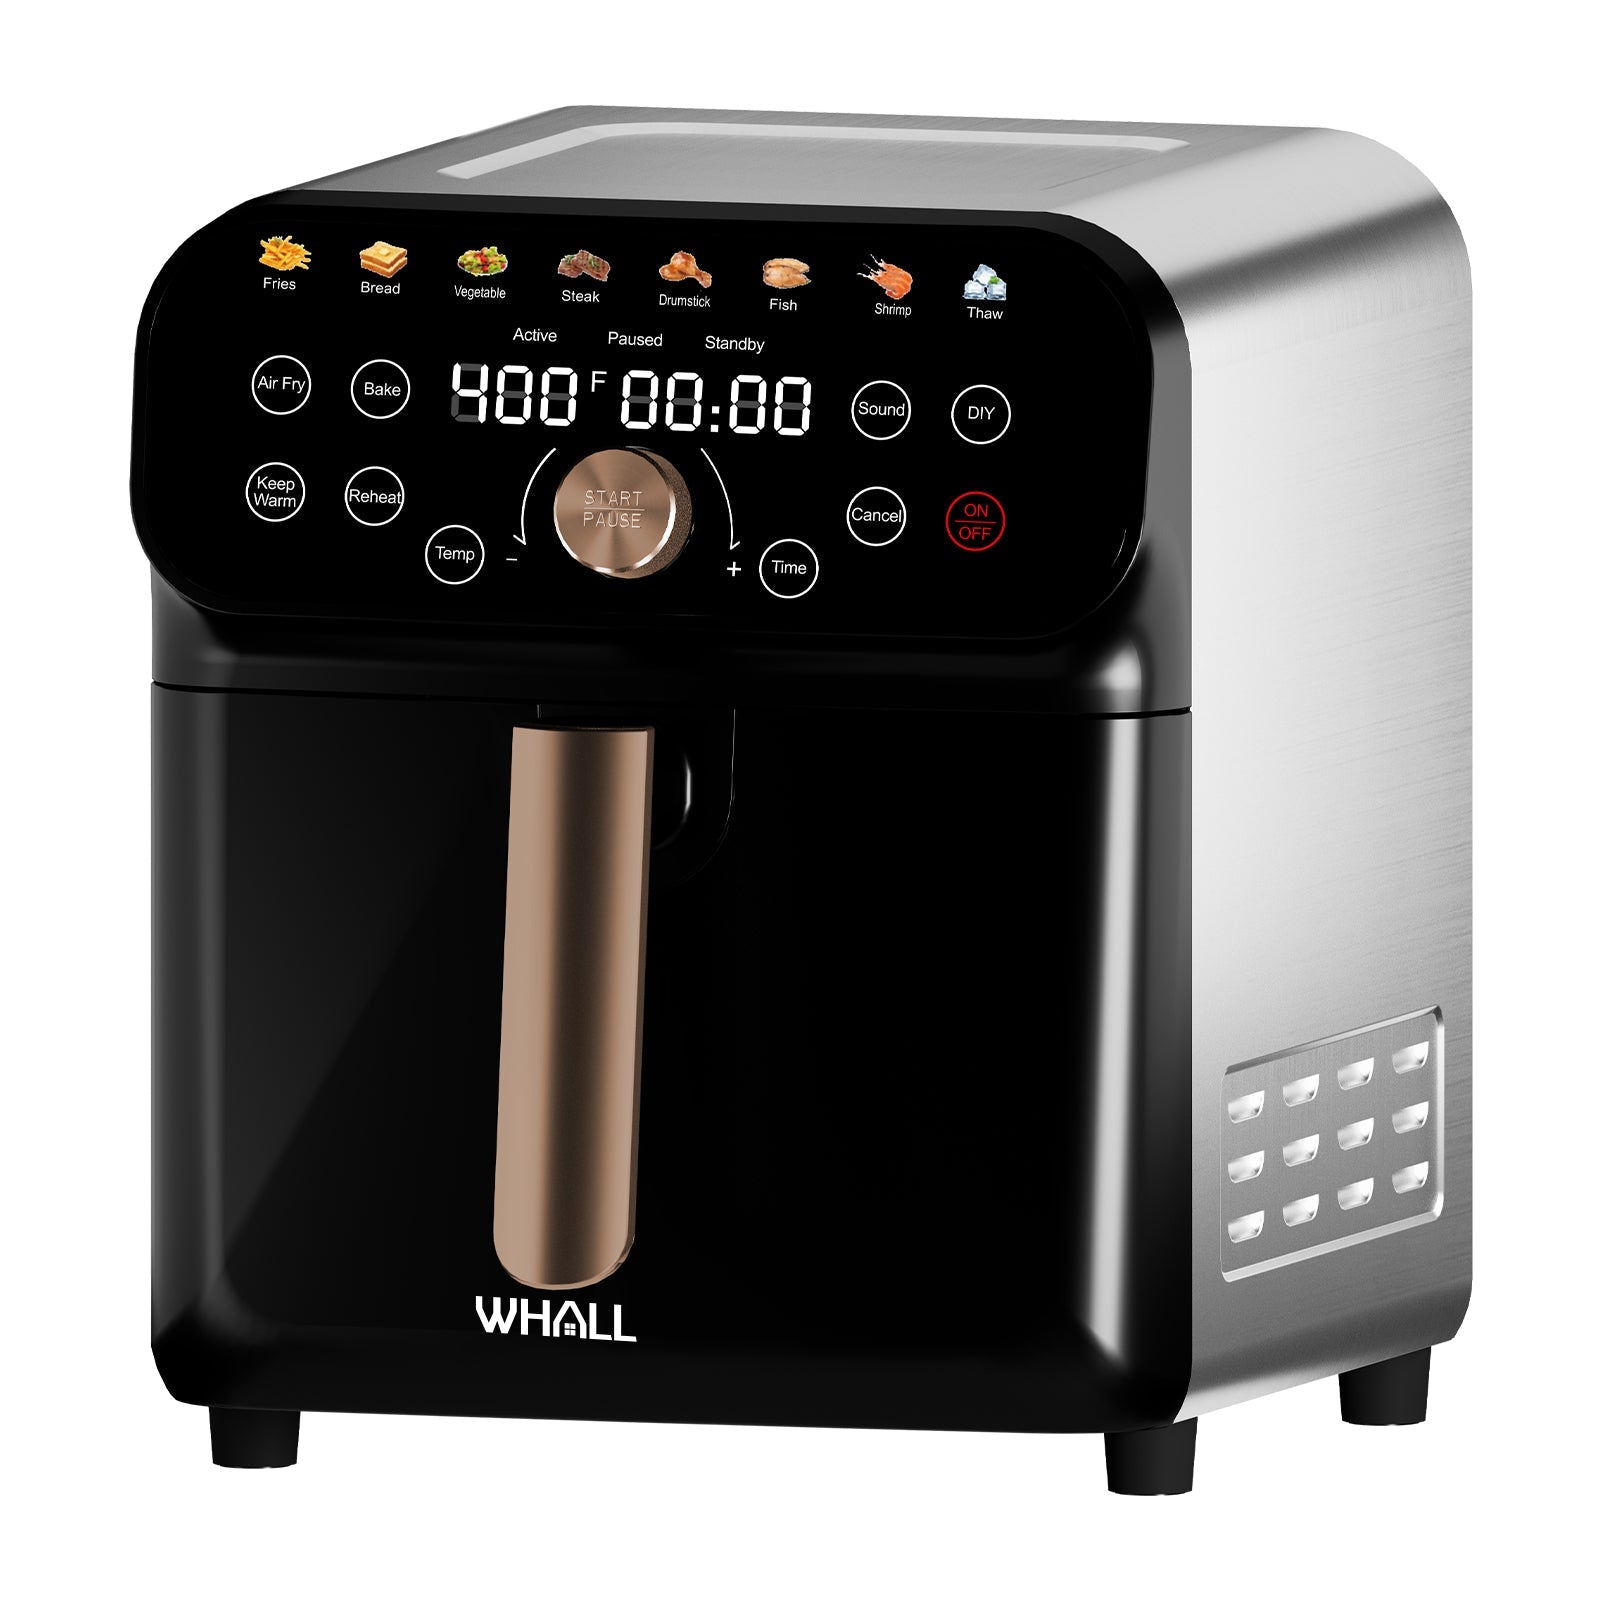 WHALL Air Fryer, 6.3Qt Air Fryer Oven with LED Digital Touchscreen, Custom Presets, Nonstick and Dishwasher-Safe Basket, Stainless Steel/1600W